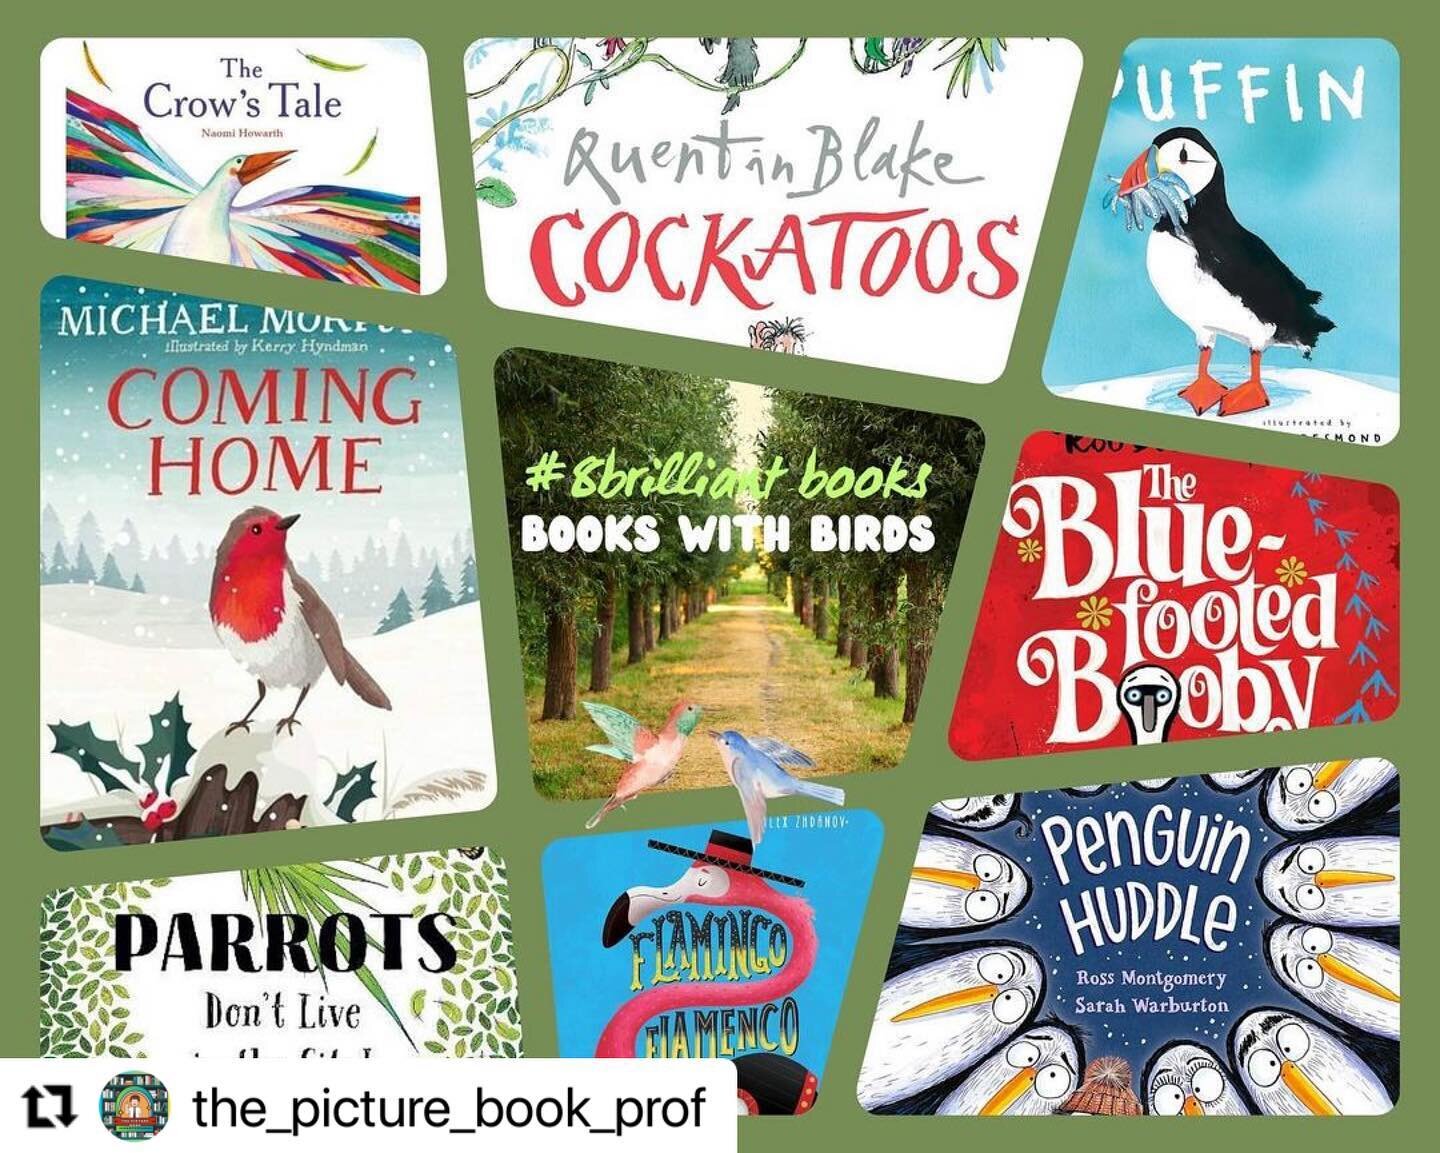 Delighted to feature in such a beautifully birdish selection of children&rsquo;s books 🎉🦜🙏 Thank you so much @the_picture_book_prof &amp; @mrsbrownsbookbox for including Parrots in your fantastically feathery and wonderful list! 🙌🦜💕🙏📚

#Repos